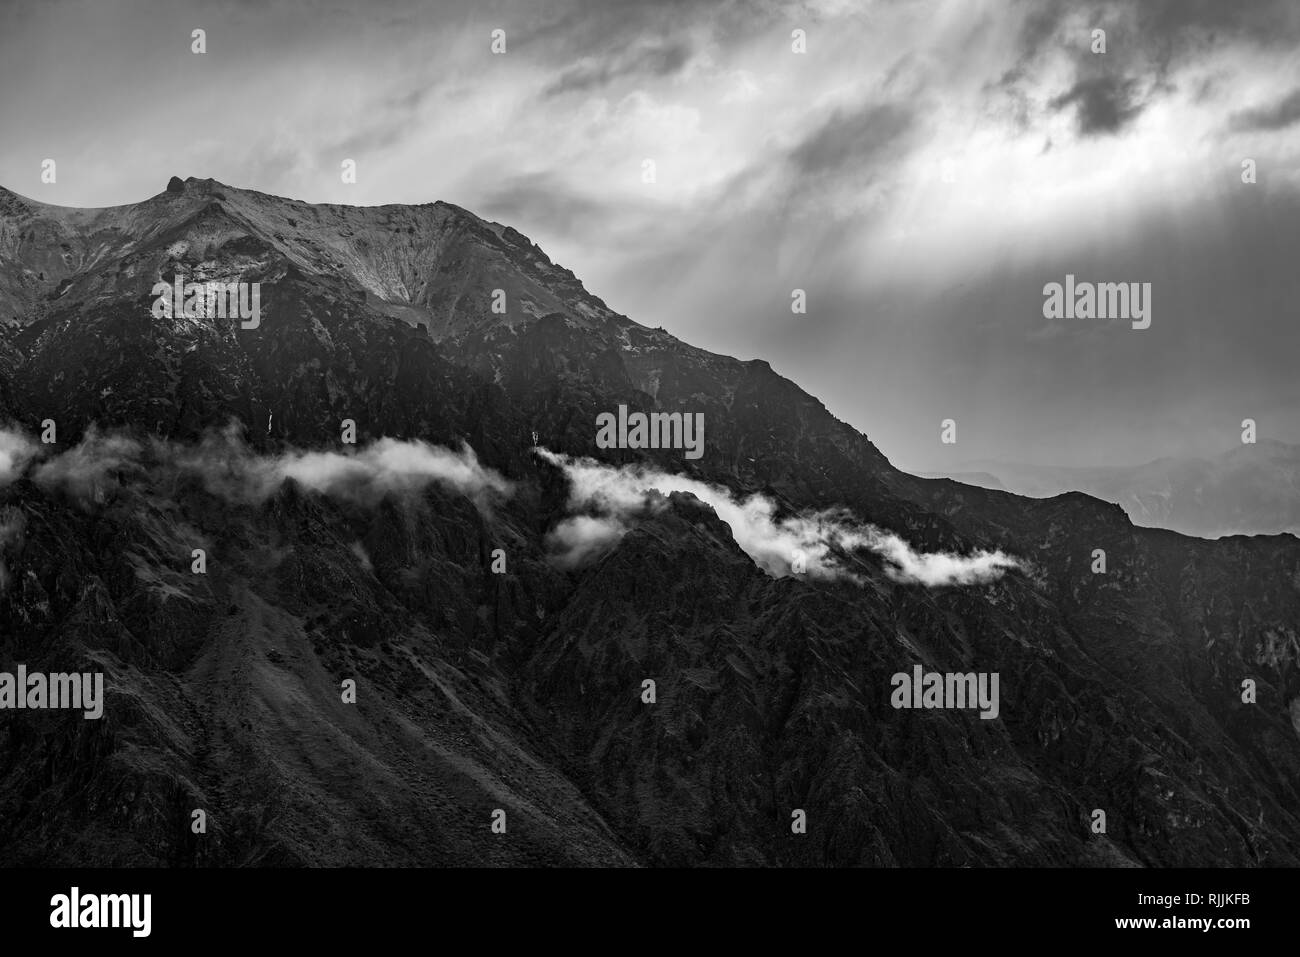 The Andes mountain range in black and white as sunlight illuminates the peaks and clouds near the Colca Canyon, Arequipa, Peru. Stock Photo